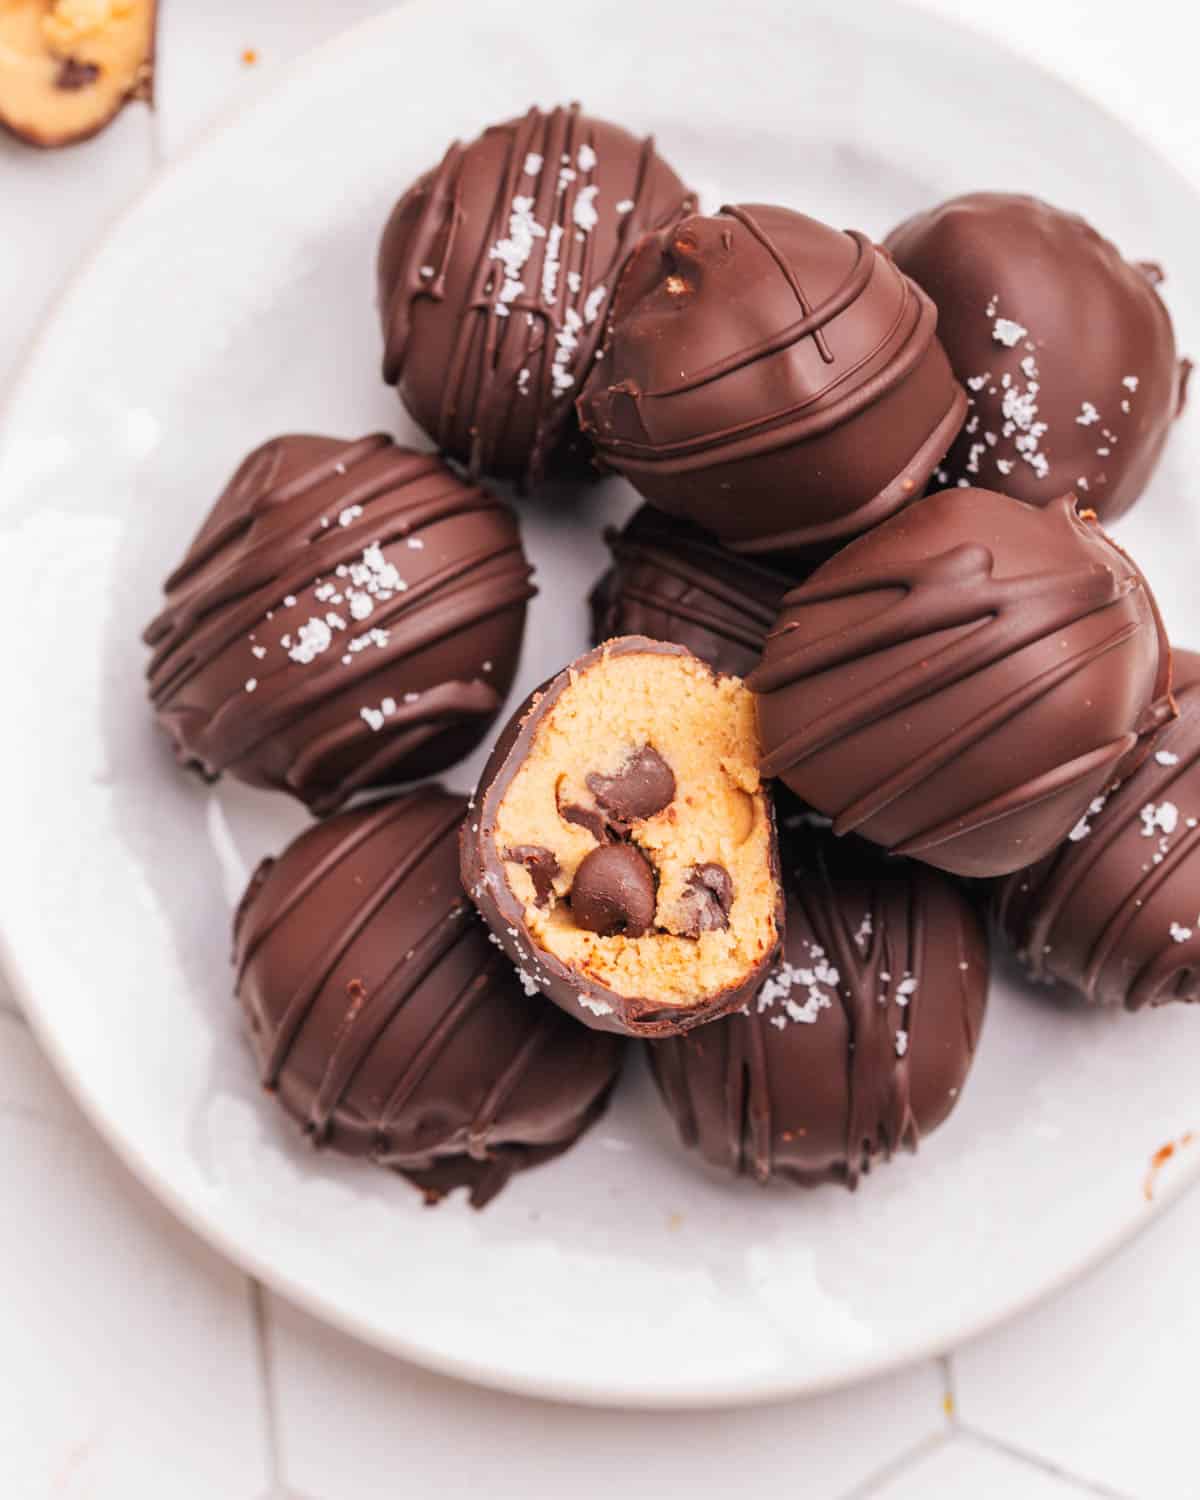 Cookie dough bites covered in chocolate in a pile on a plate. The top one has a bite taken.